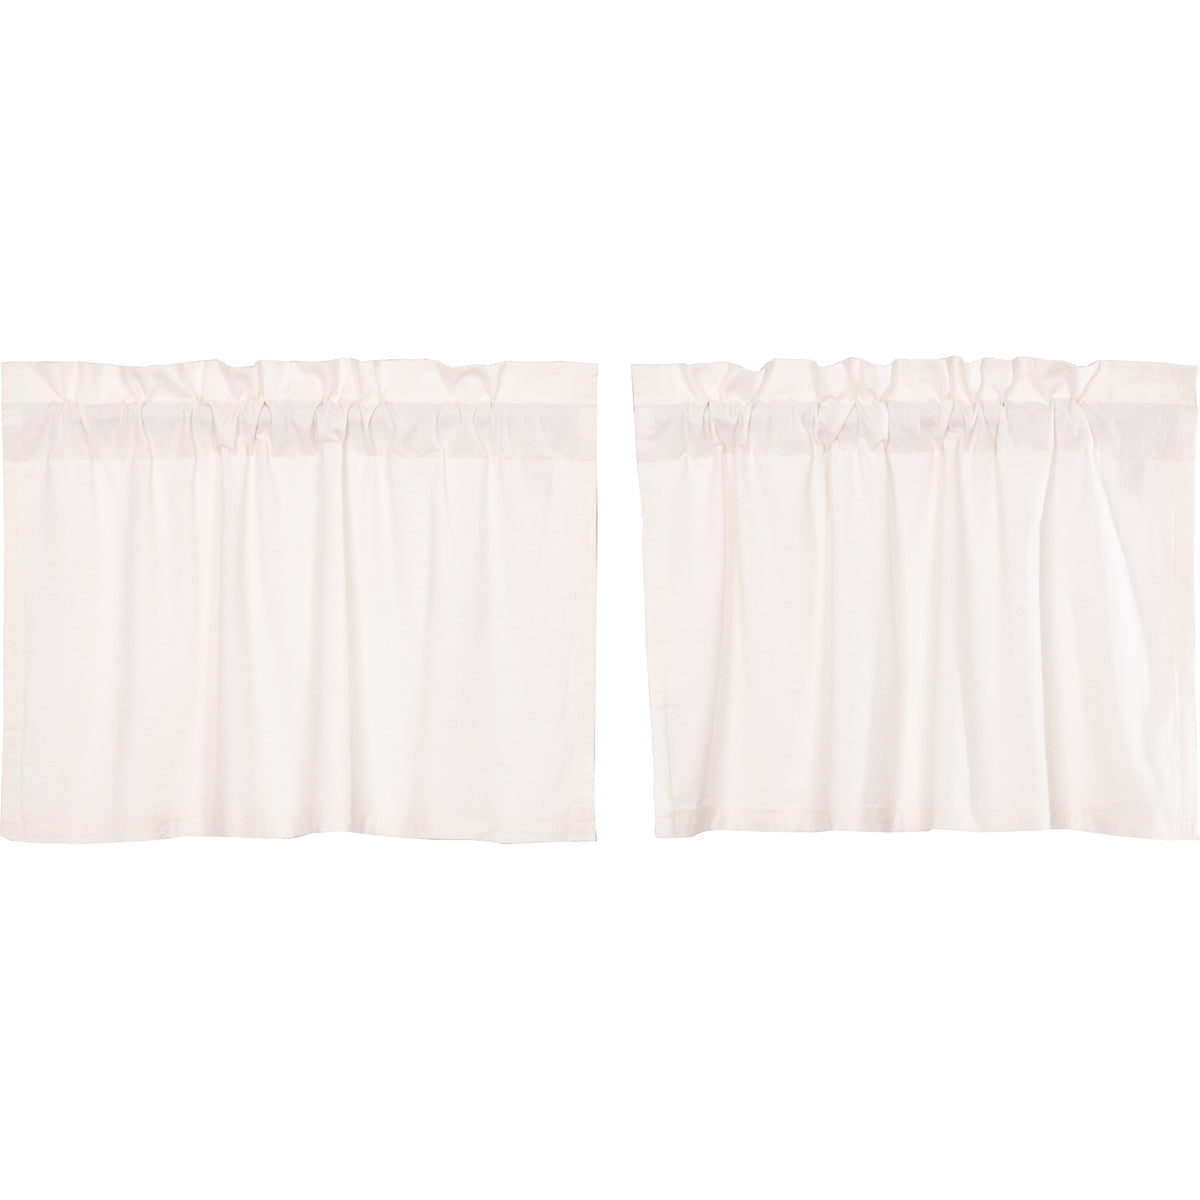 April & Olive Simple Life Flax Antique White Tier Set of 2 L24xW36 By VHC Brands